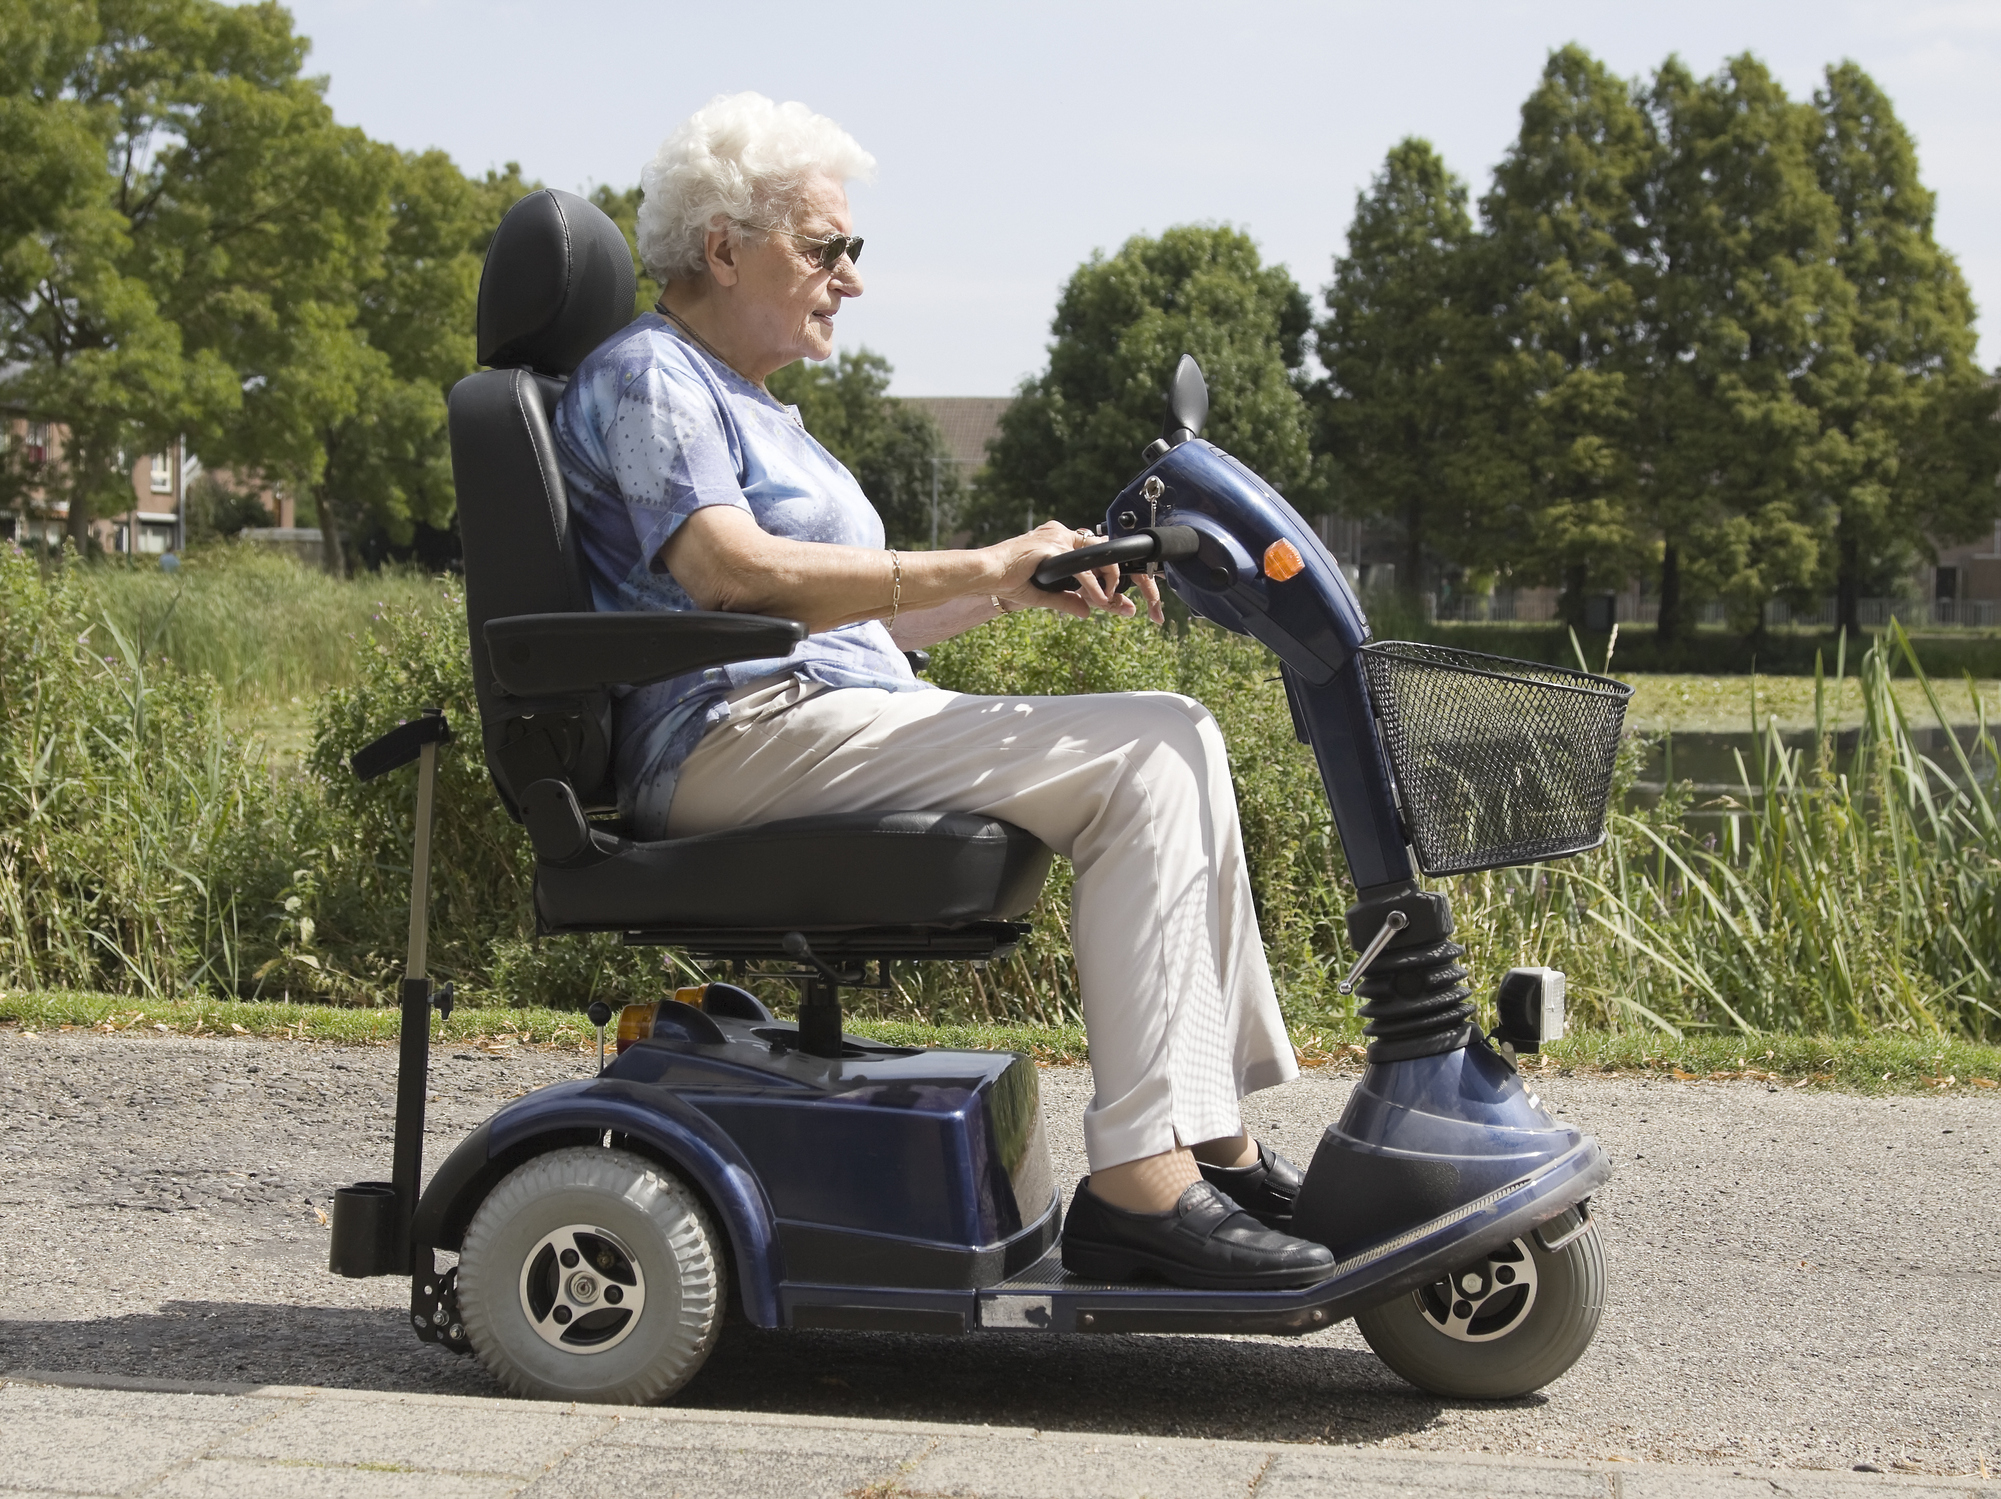 An elderly woman moving through a park on a mobility scooter.